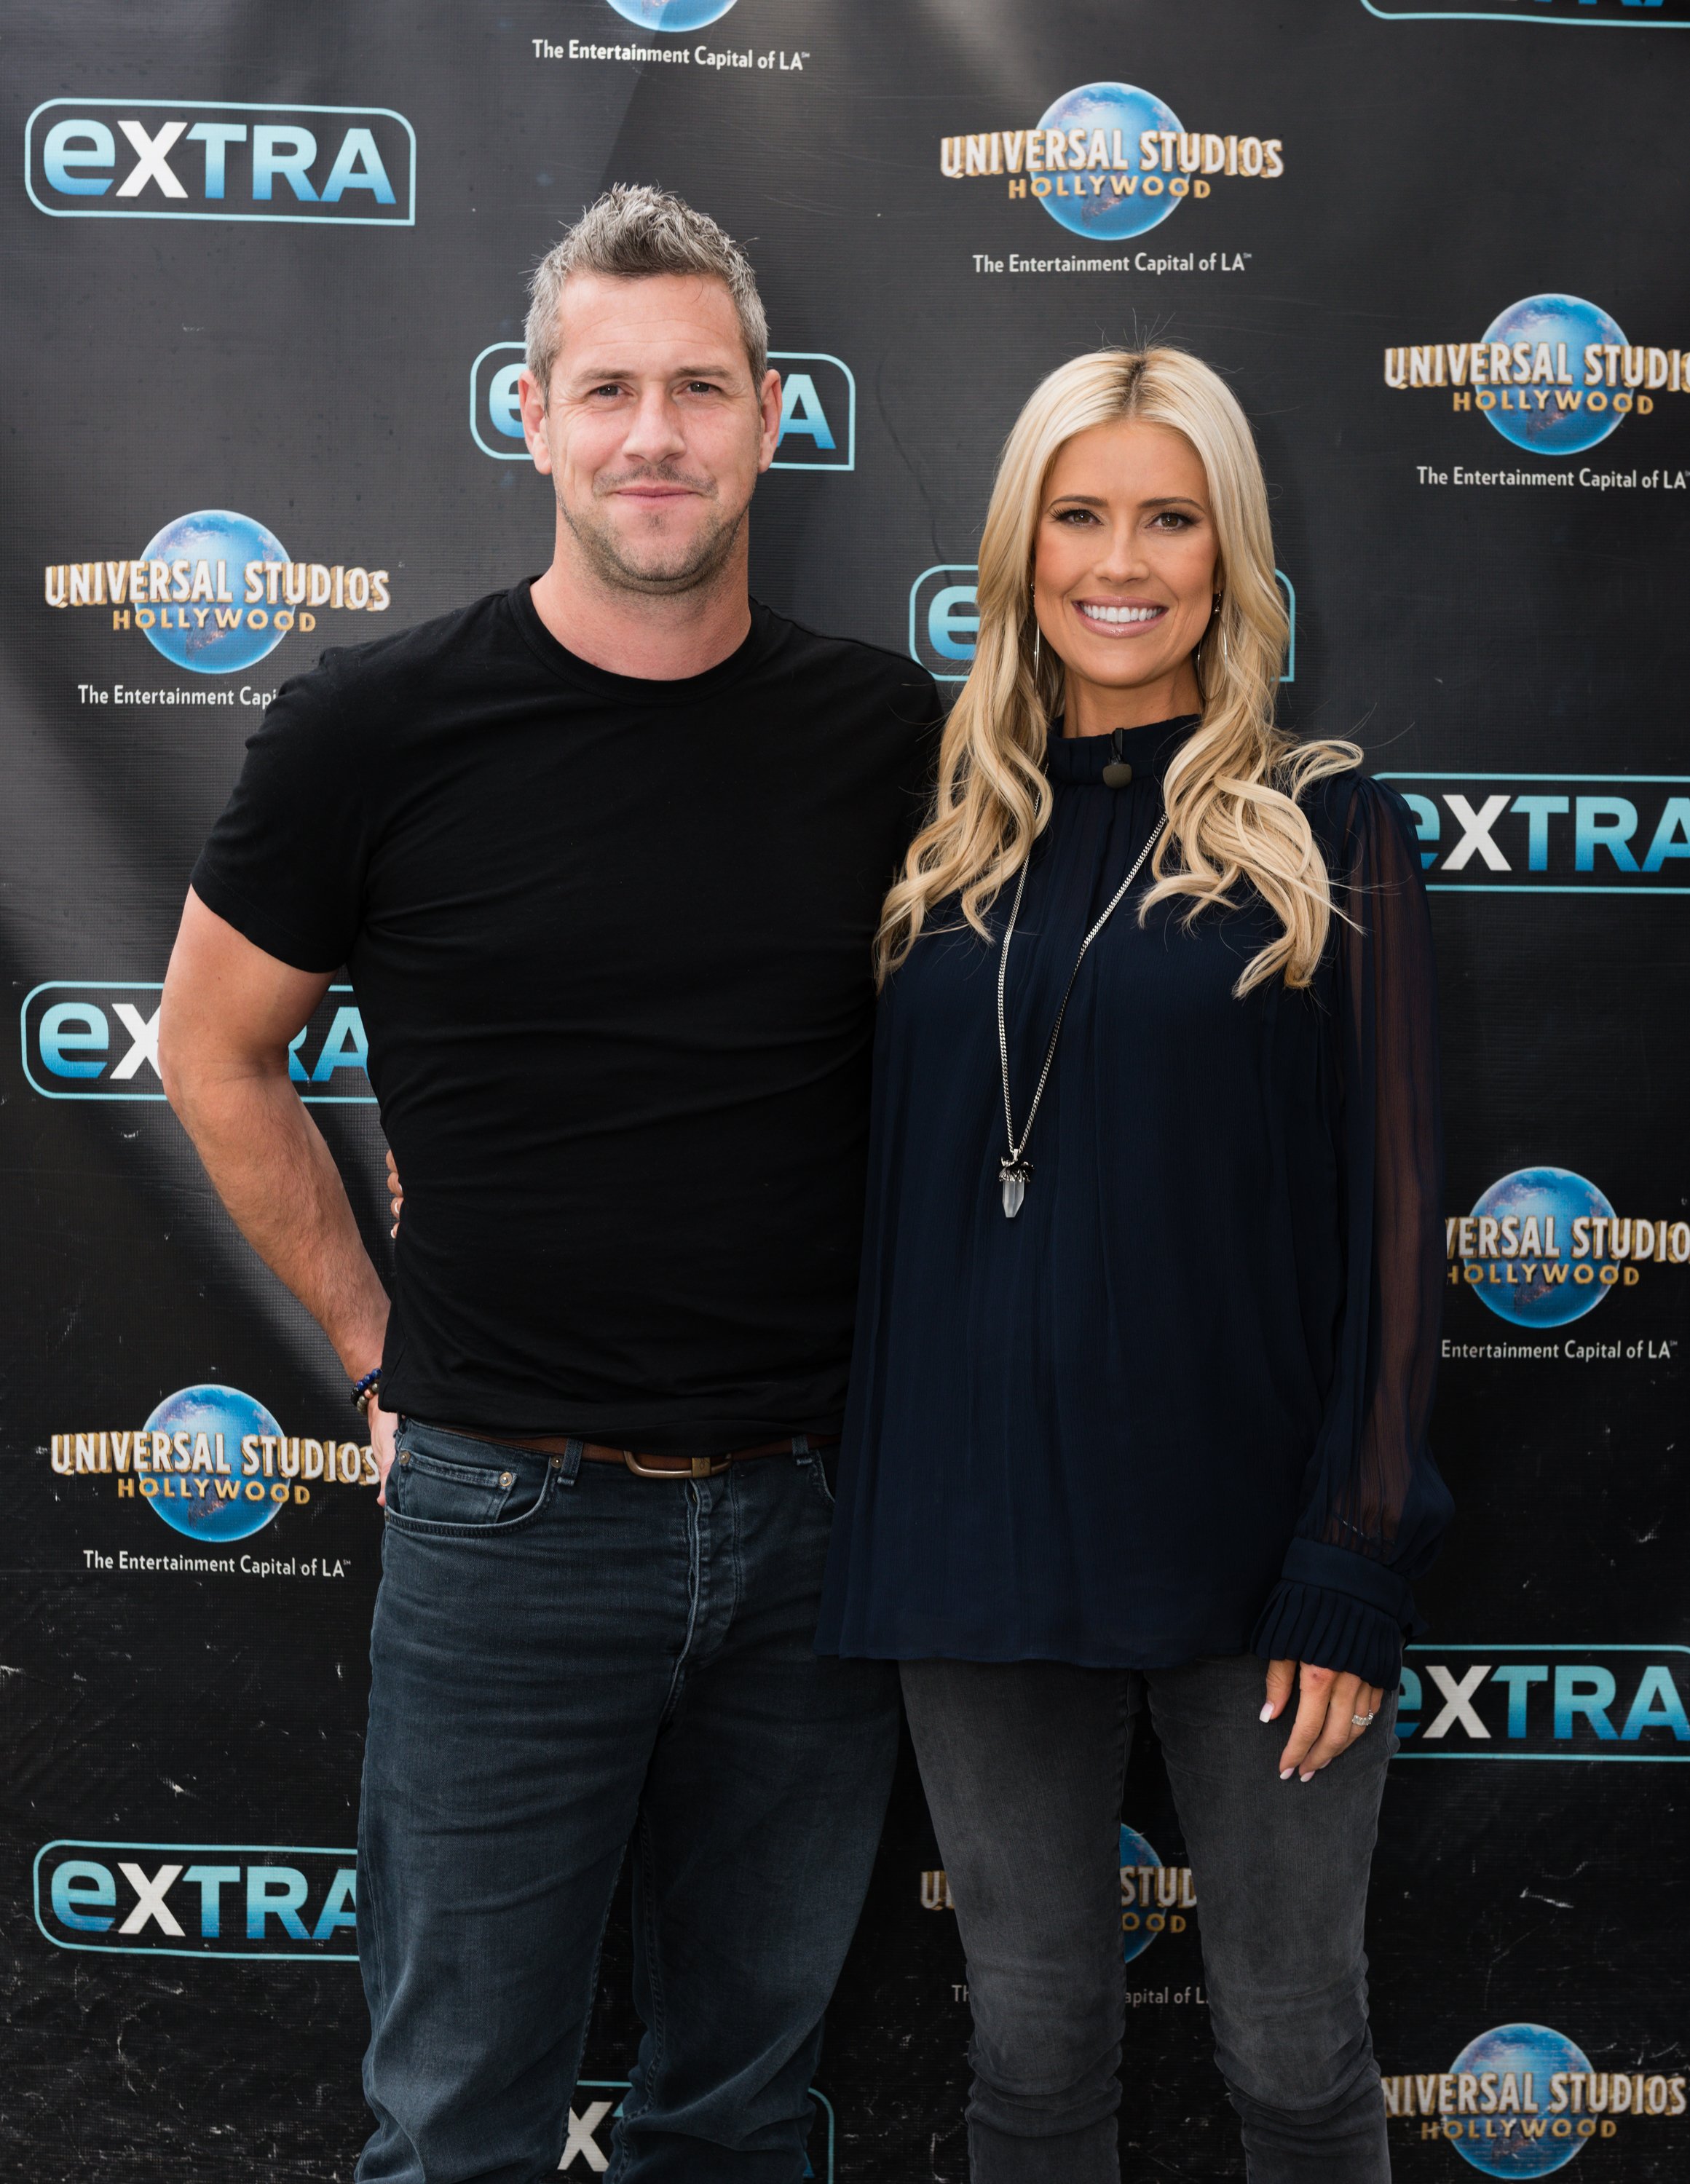 Christina Anstead and Ant Anstead visit "Extra" in Universal City, California on May 22, 2019 | Photo: Getty Images